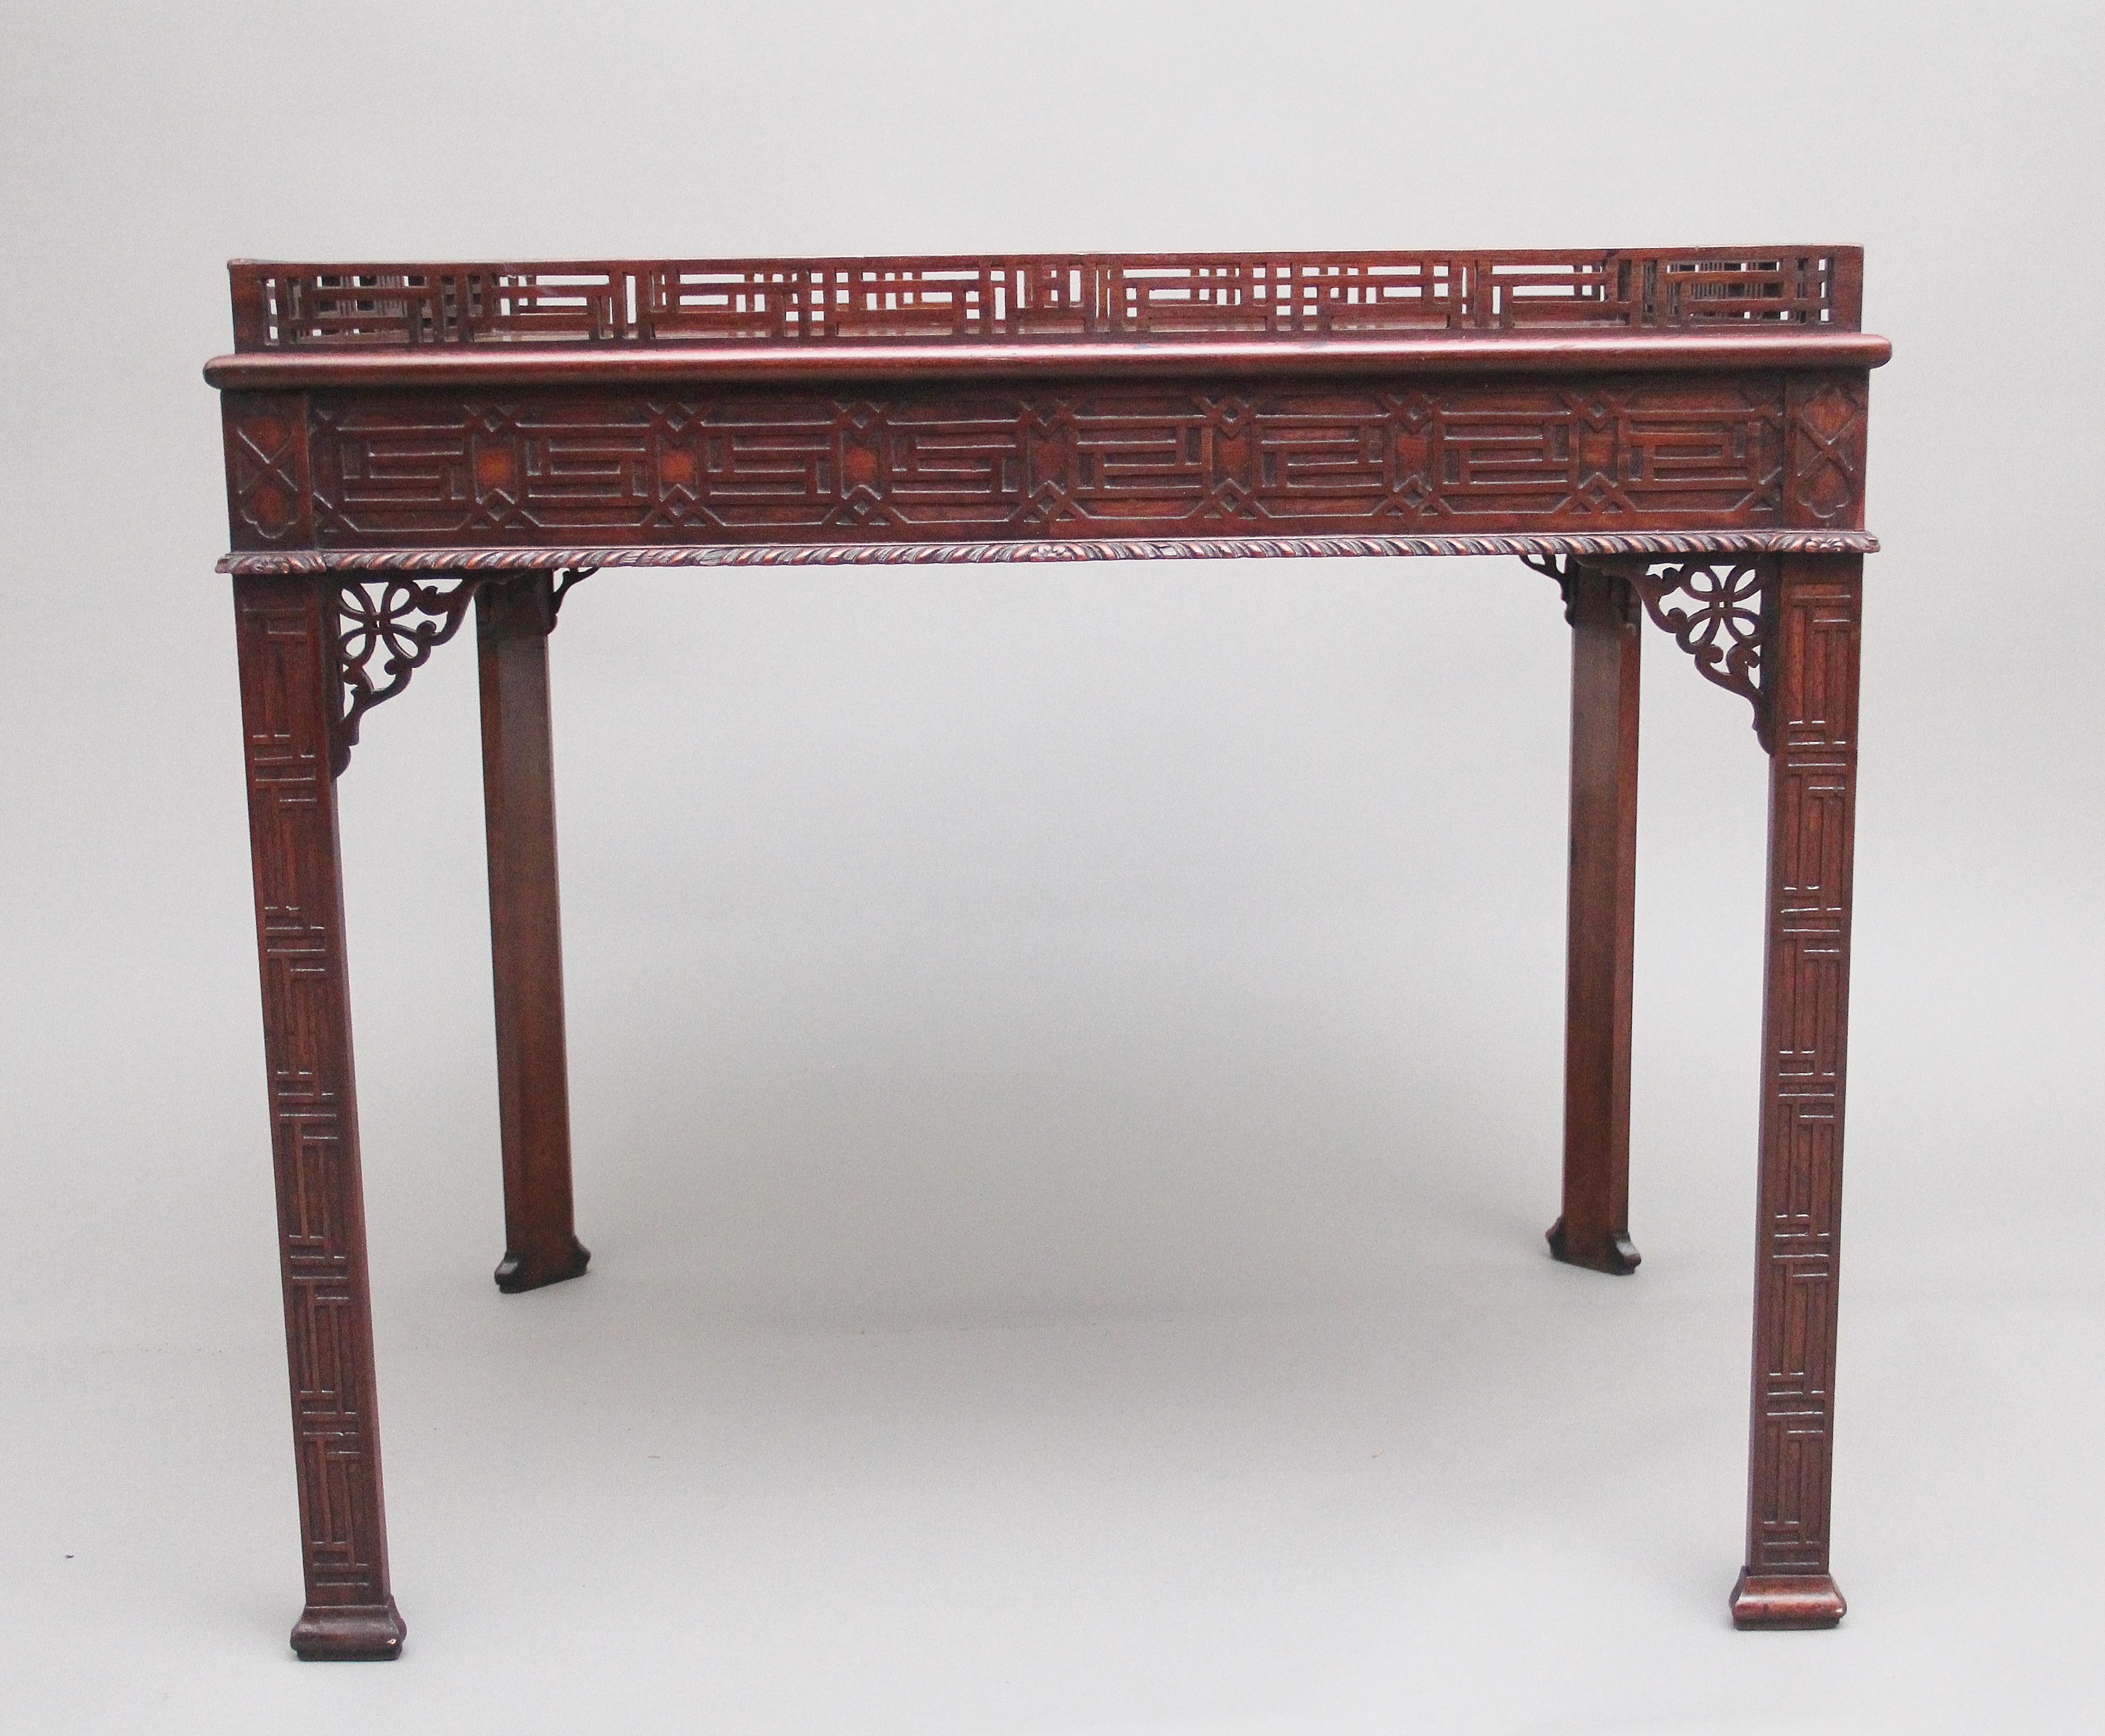 19th century Mahogany silver / occasional table in the Chinese Chippendale style, having a nice figured top with a decorative pierced fret gallery, the frieze below having decorative blind fret carving on all sides, pierced fret corner brackets,